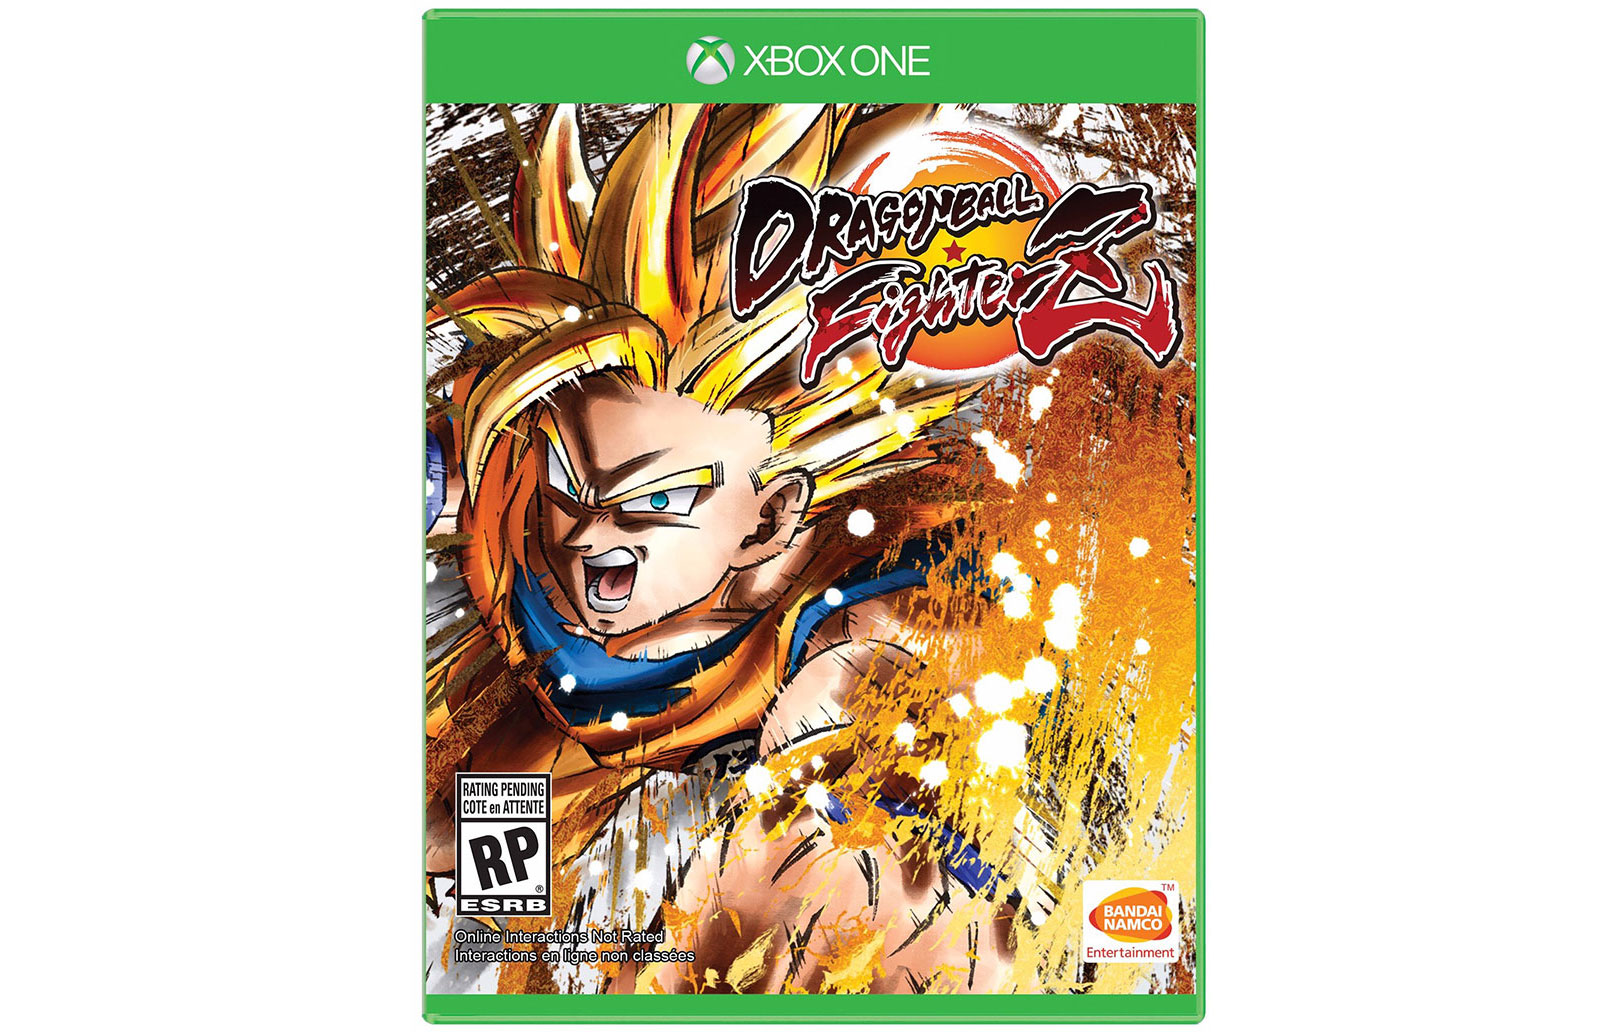 DRAGON BALL FIGHTERZ IS COMING THIS JANUARY AND ITS BRINGING ALONG PLENTY OF MUST-HAVE EXCLUSIVES!